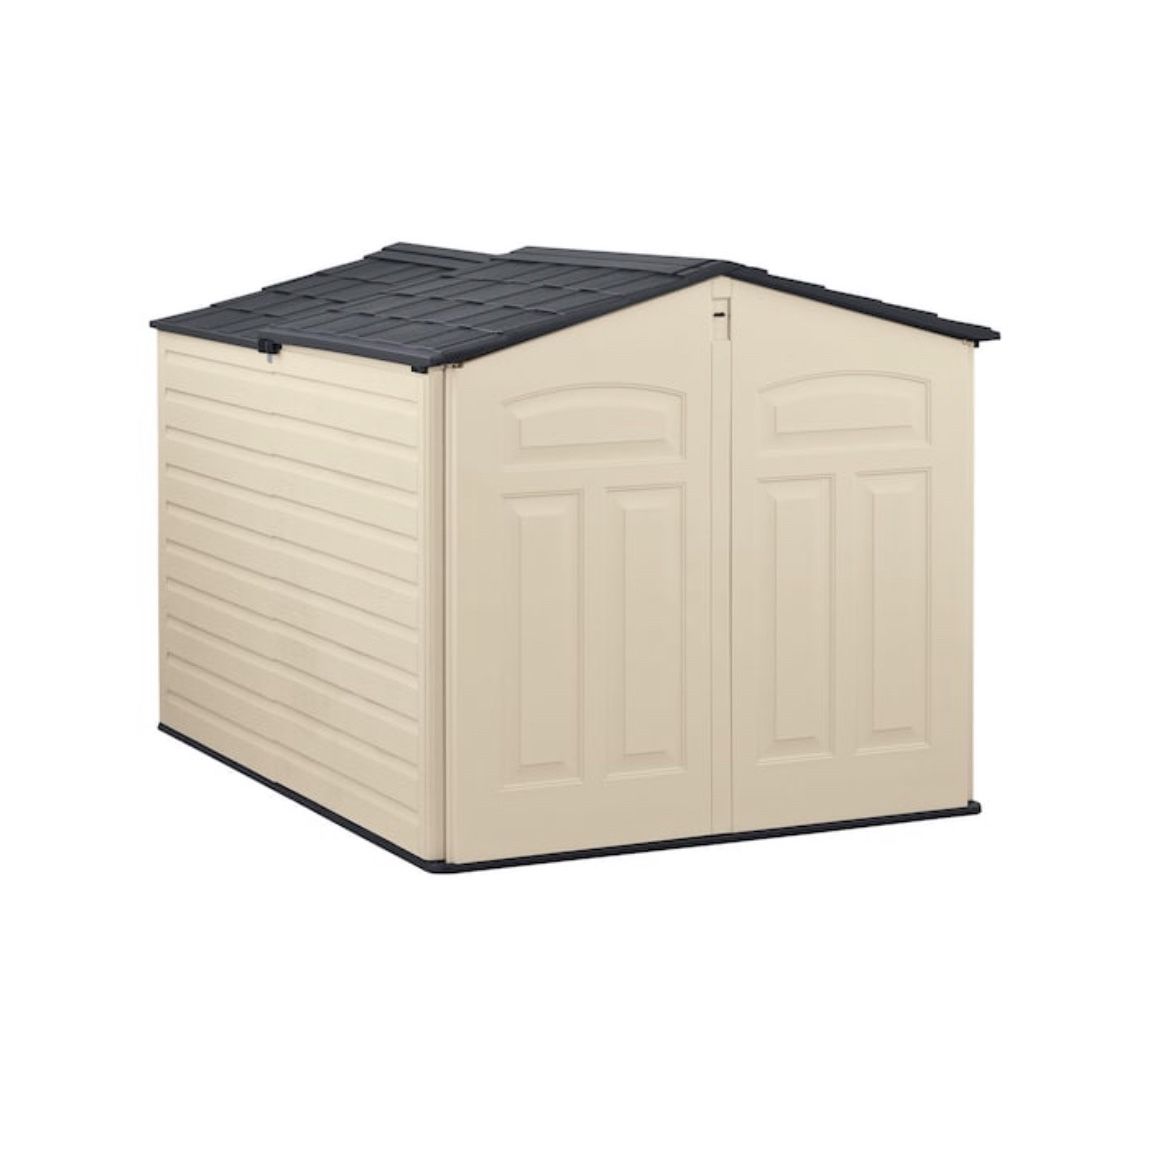 RUBBERMAID OUTDOOR STORAGE SHED for Sale in Bay Shore, NY - OfferUp